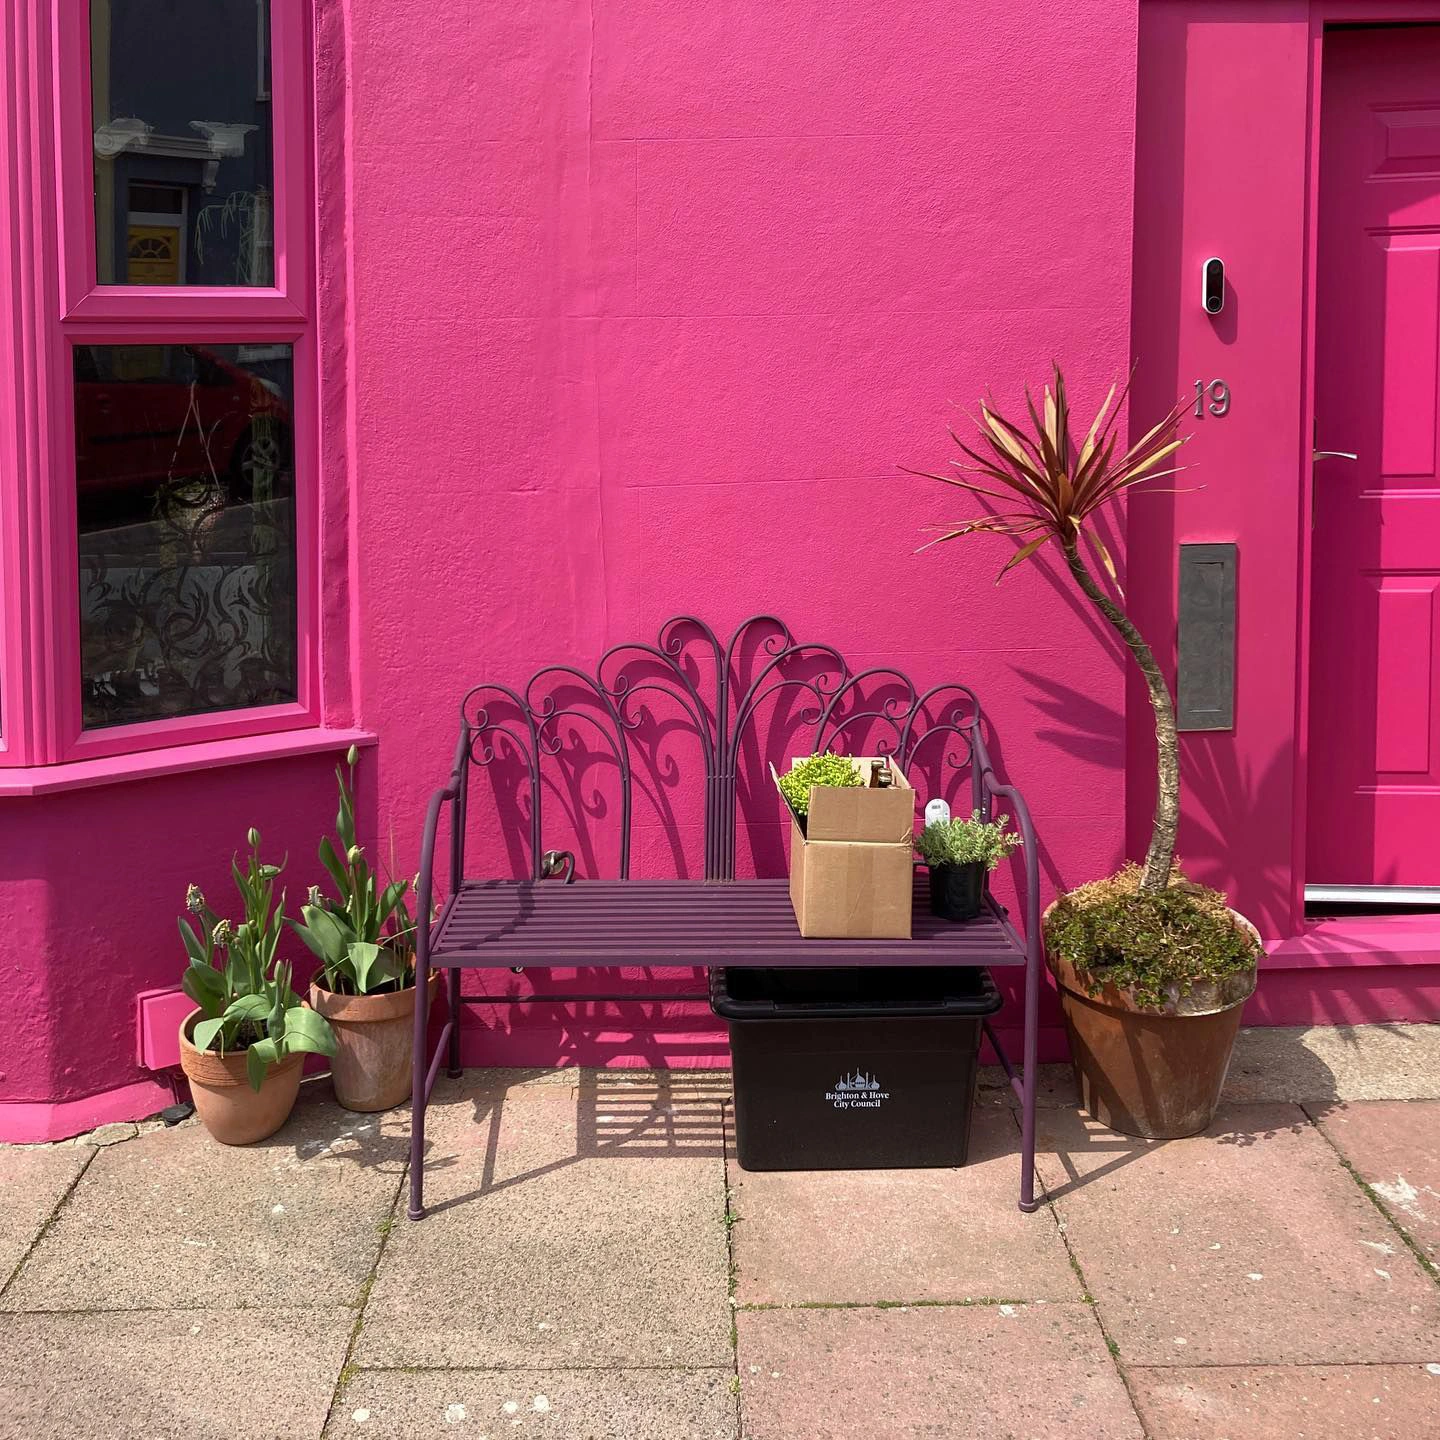 Telemagenta RAL 4010 pink exterior house